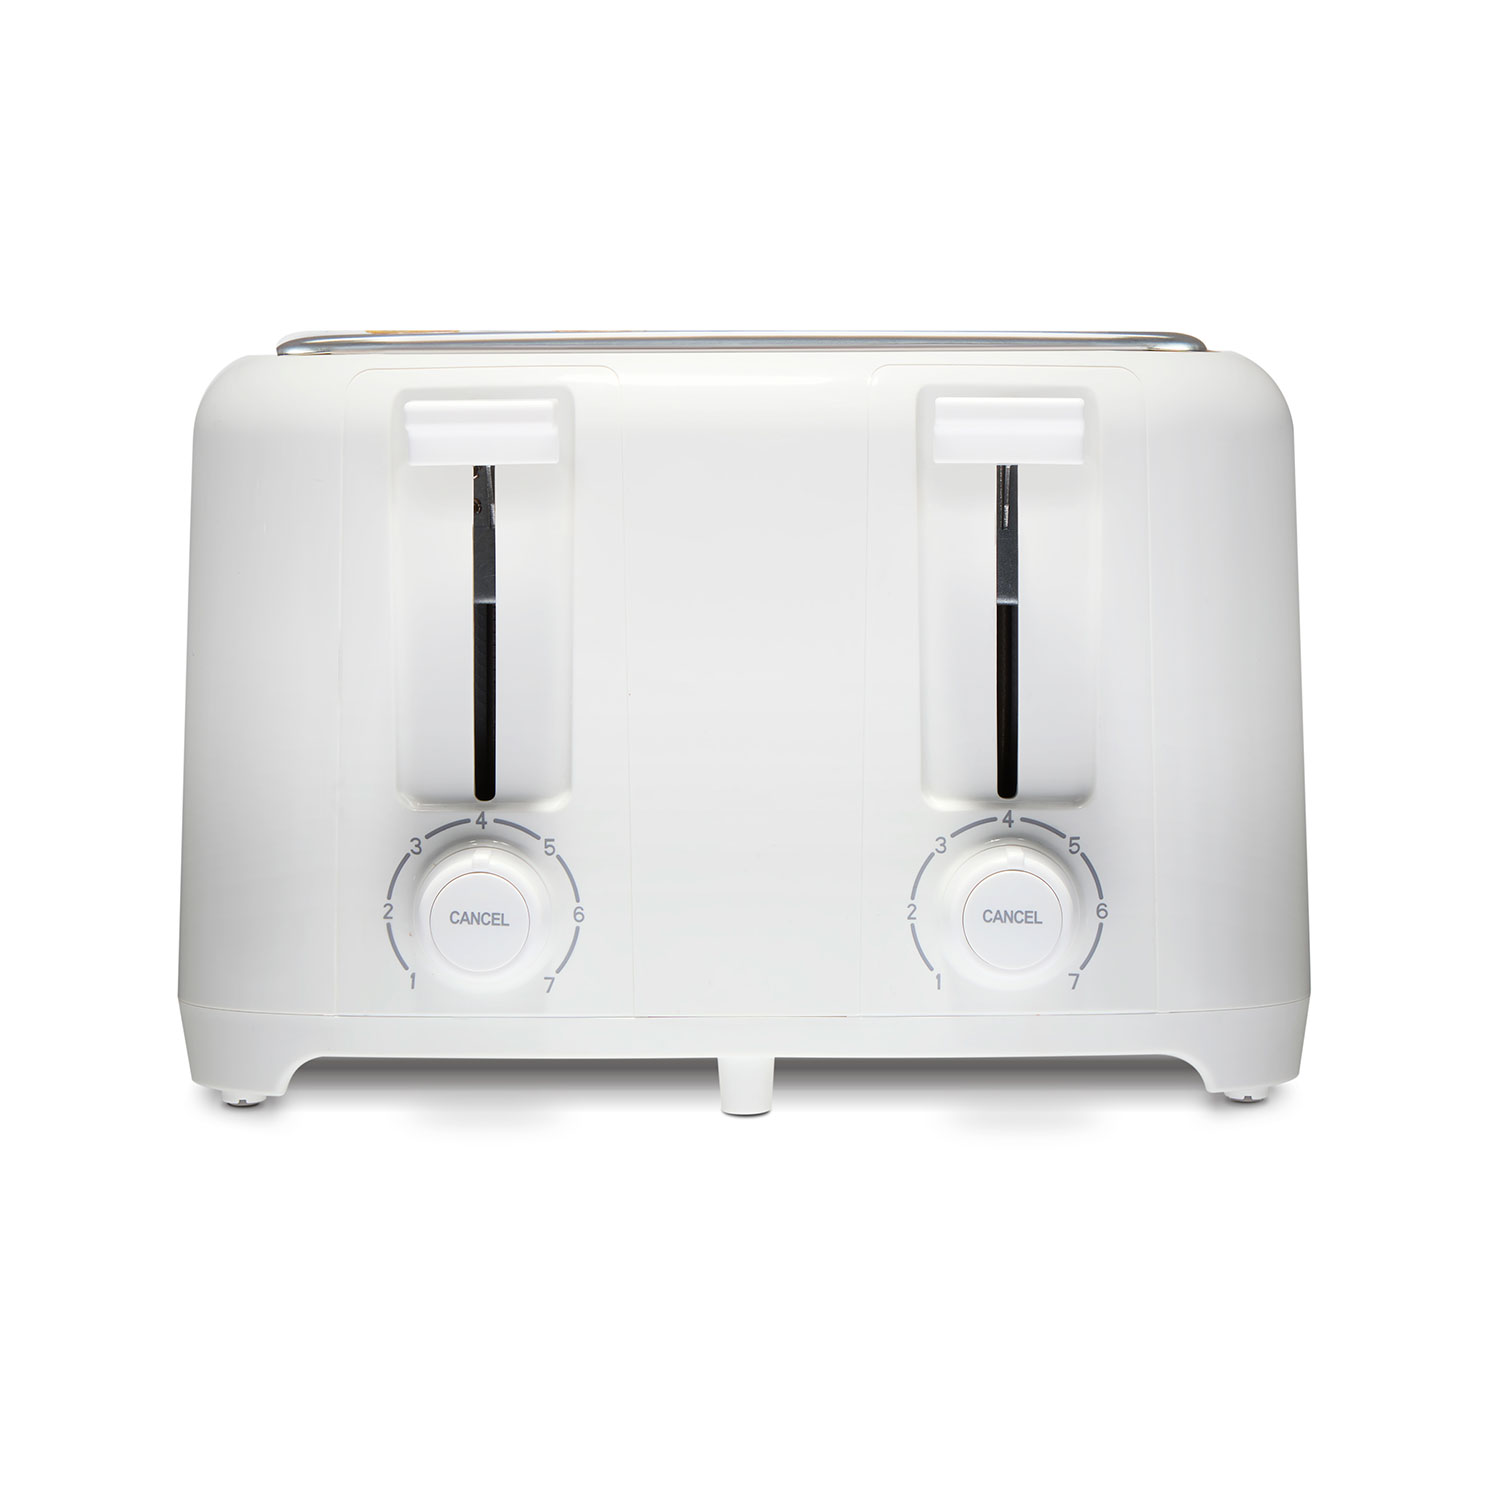 Wide-Slot 4 Slice Toaster, White - 24214PS Small Size